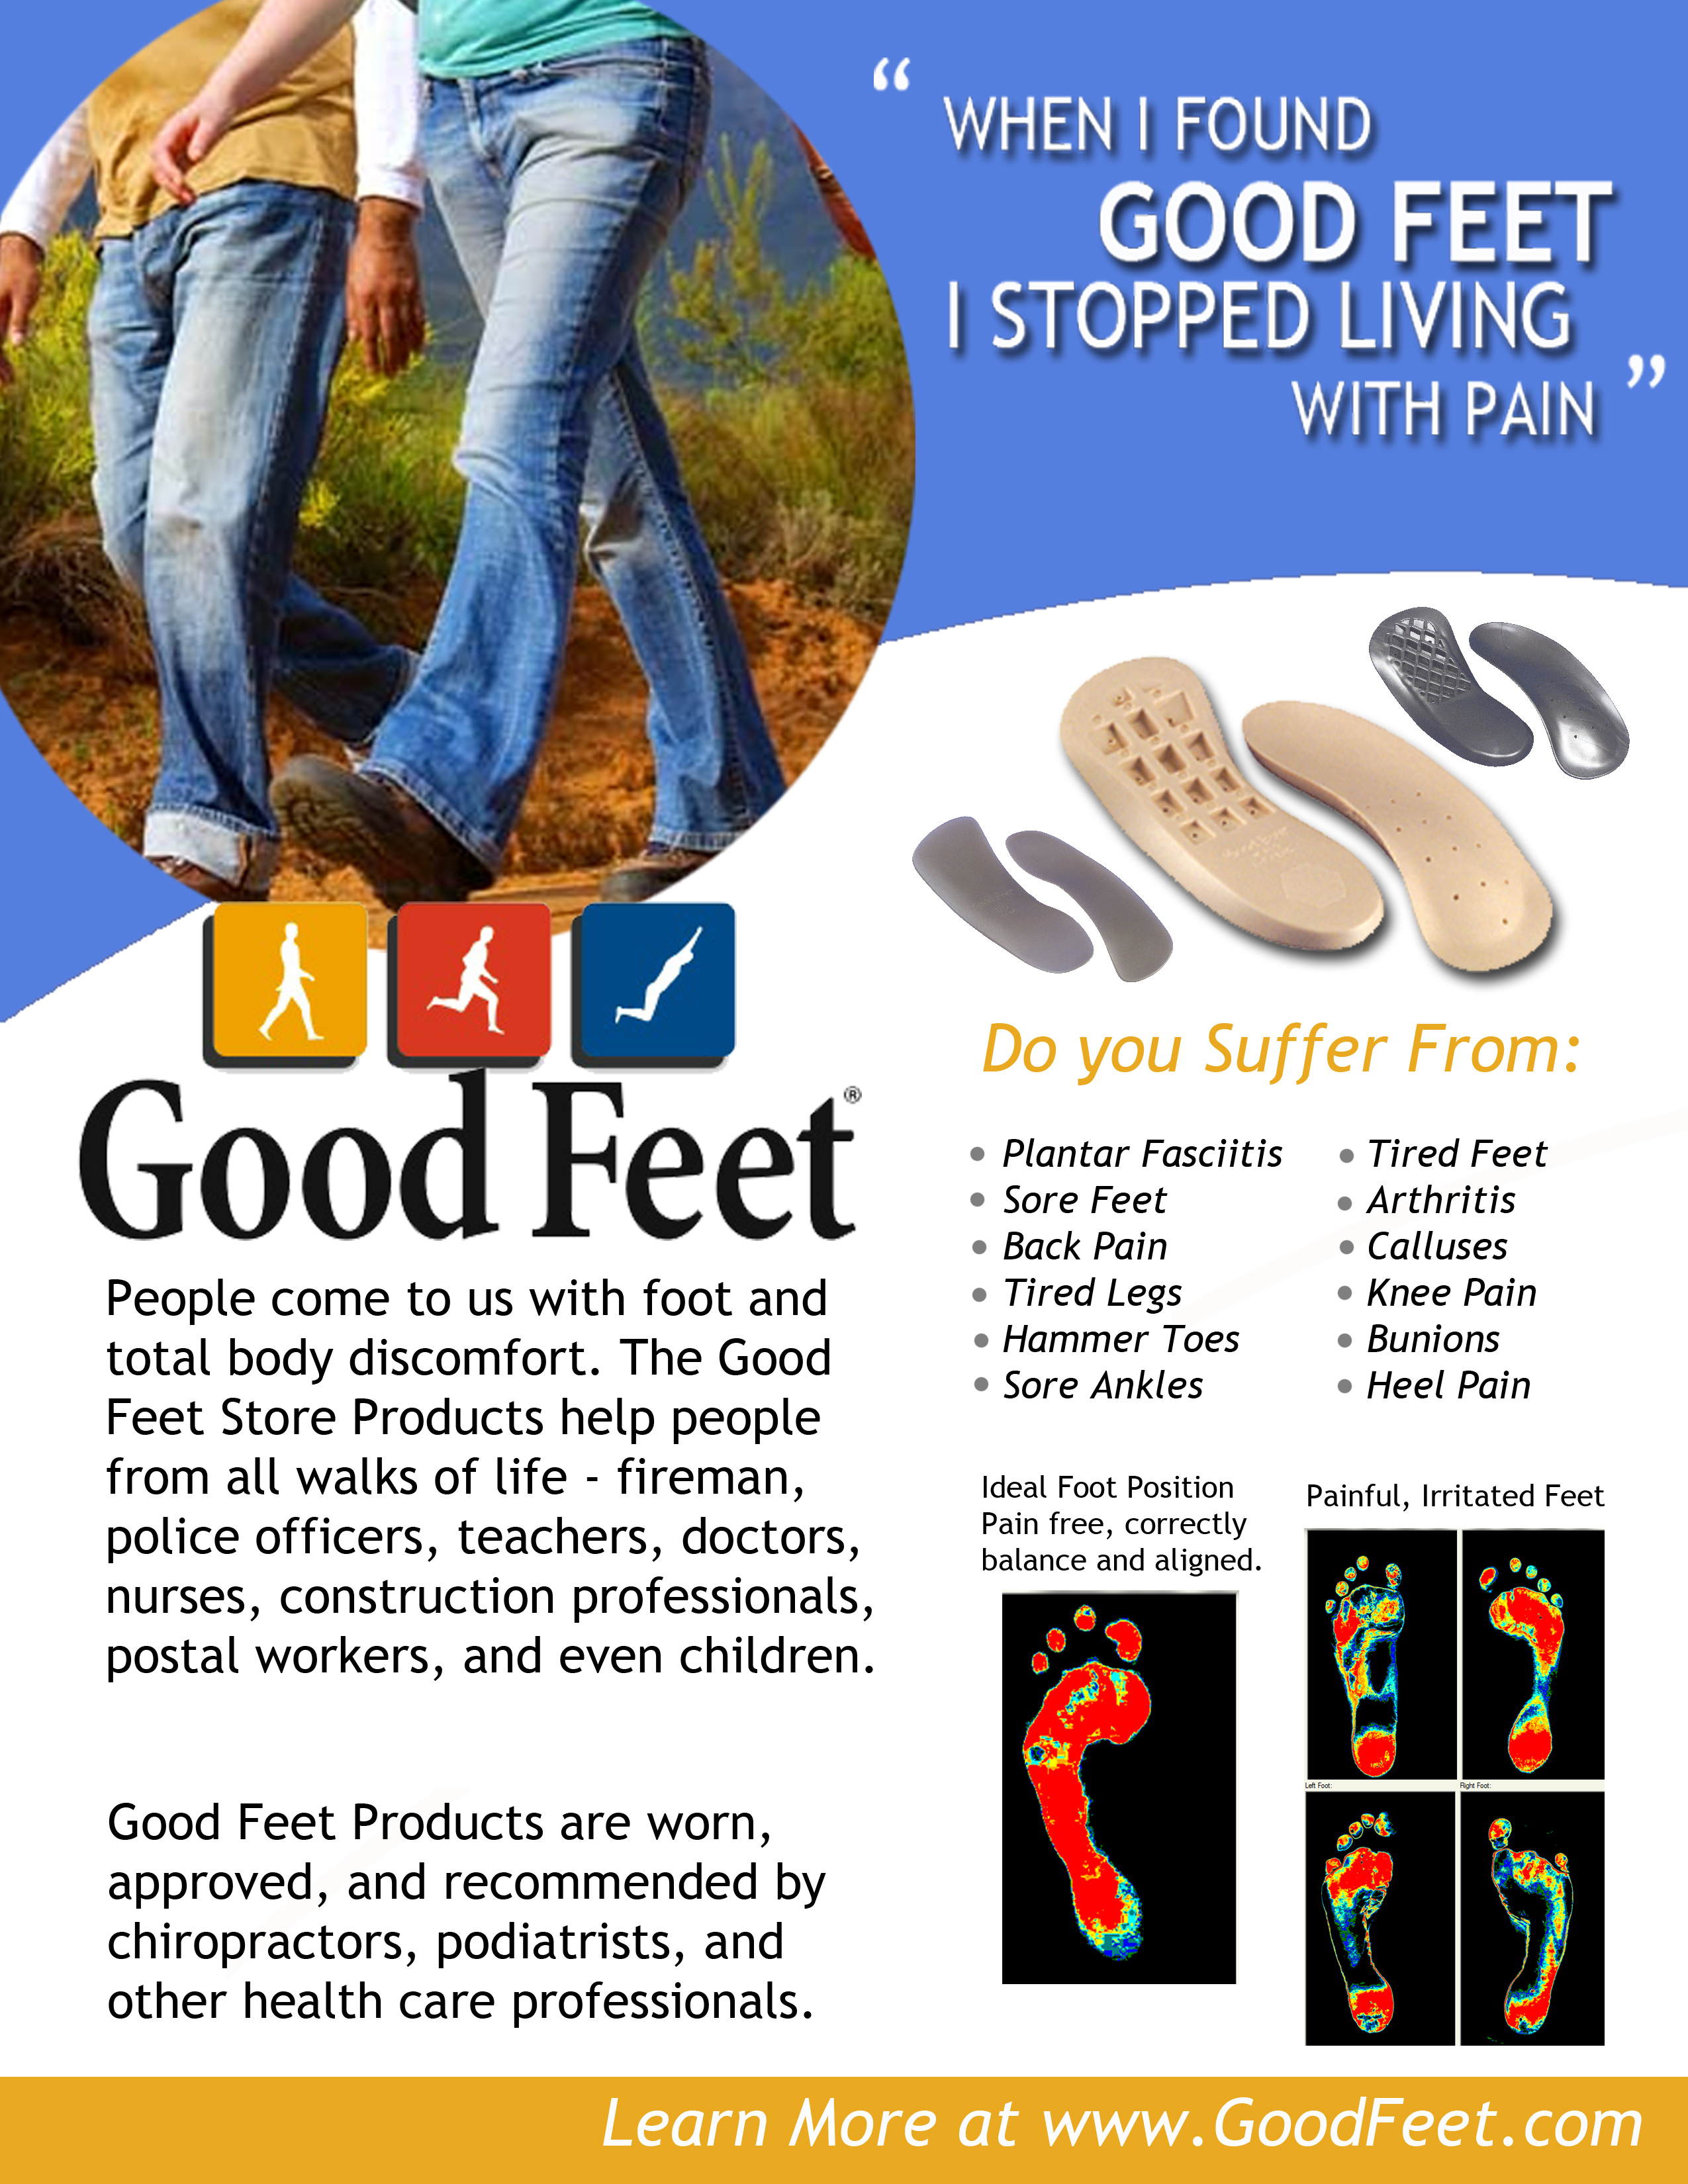 Good Feet Arch Support Stores in New 